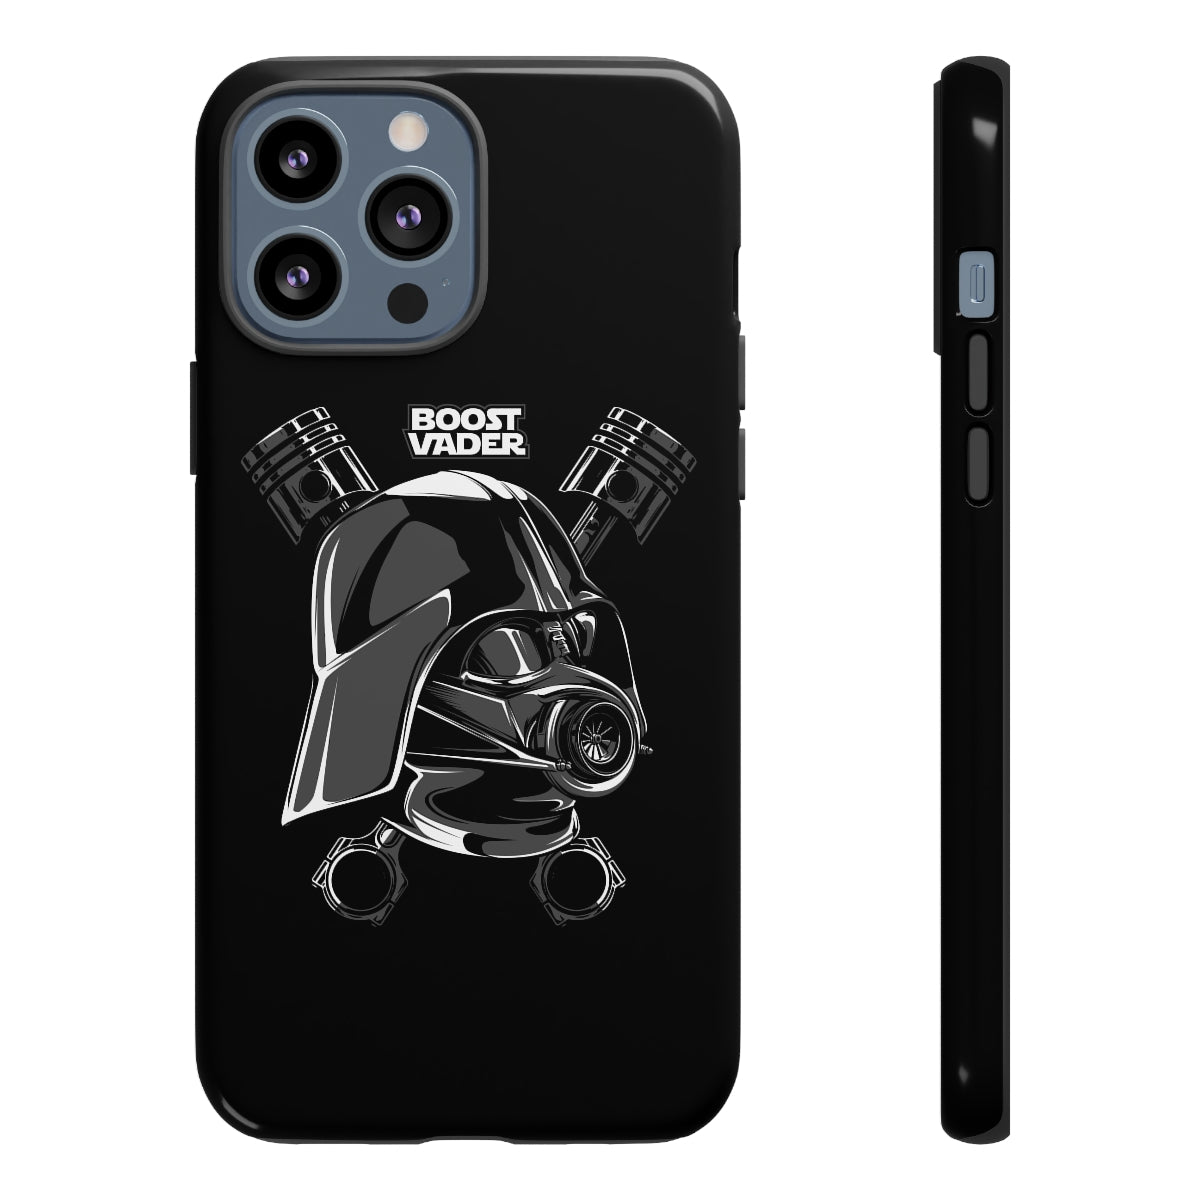 Boost Vader - Car Phone Case - iPhone 13 Pro Max